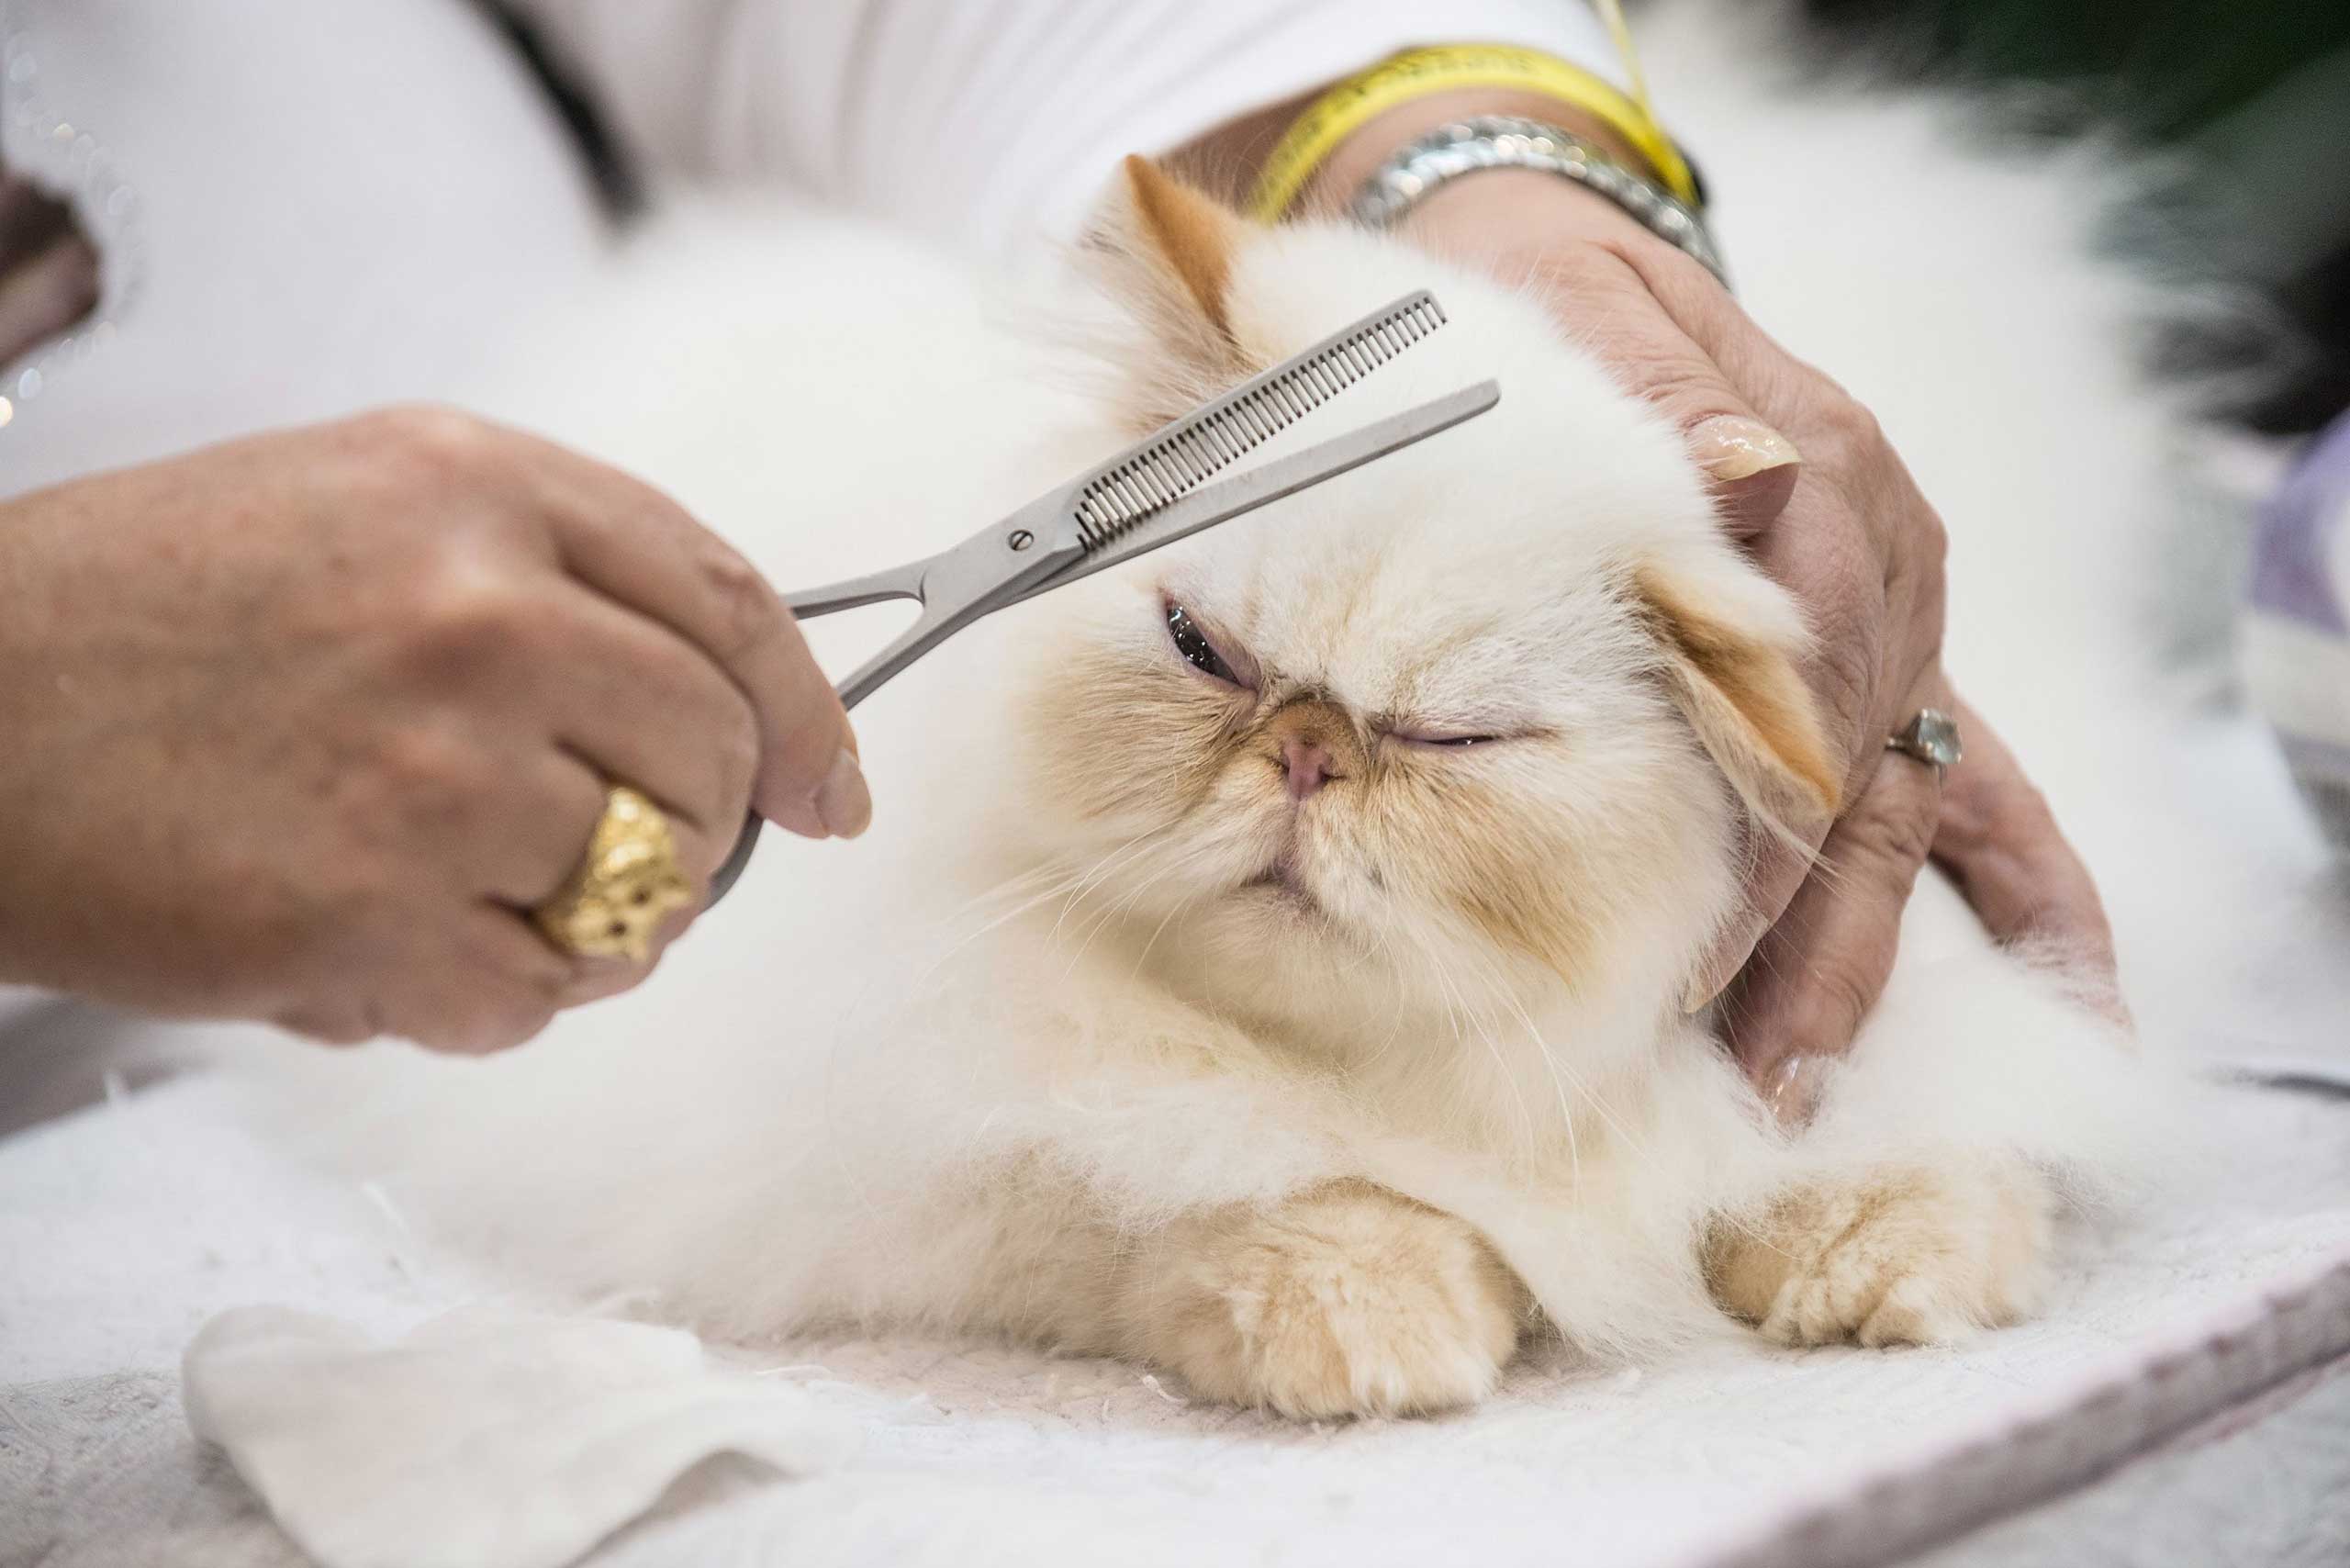 Nov. 8, 2014. A cat waits to be examined with its owner by the jury during the first day of the Super Cat Show 2014 in Rome. The Super Cat Show, which takes place on Nov. 8th and 9th, involves the participation of 800 cats of different breeds from all over the world.